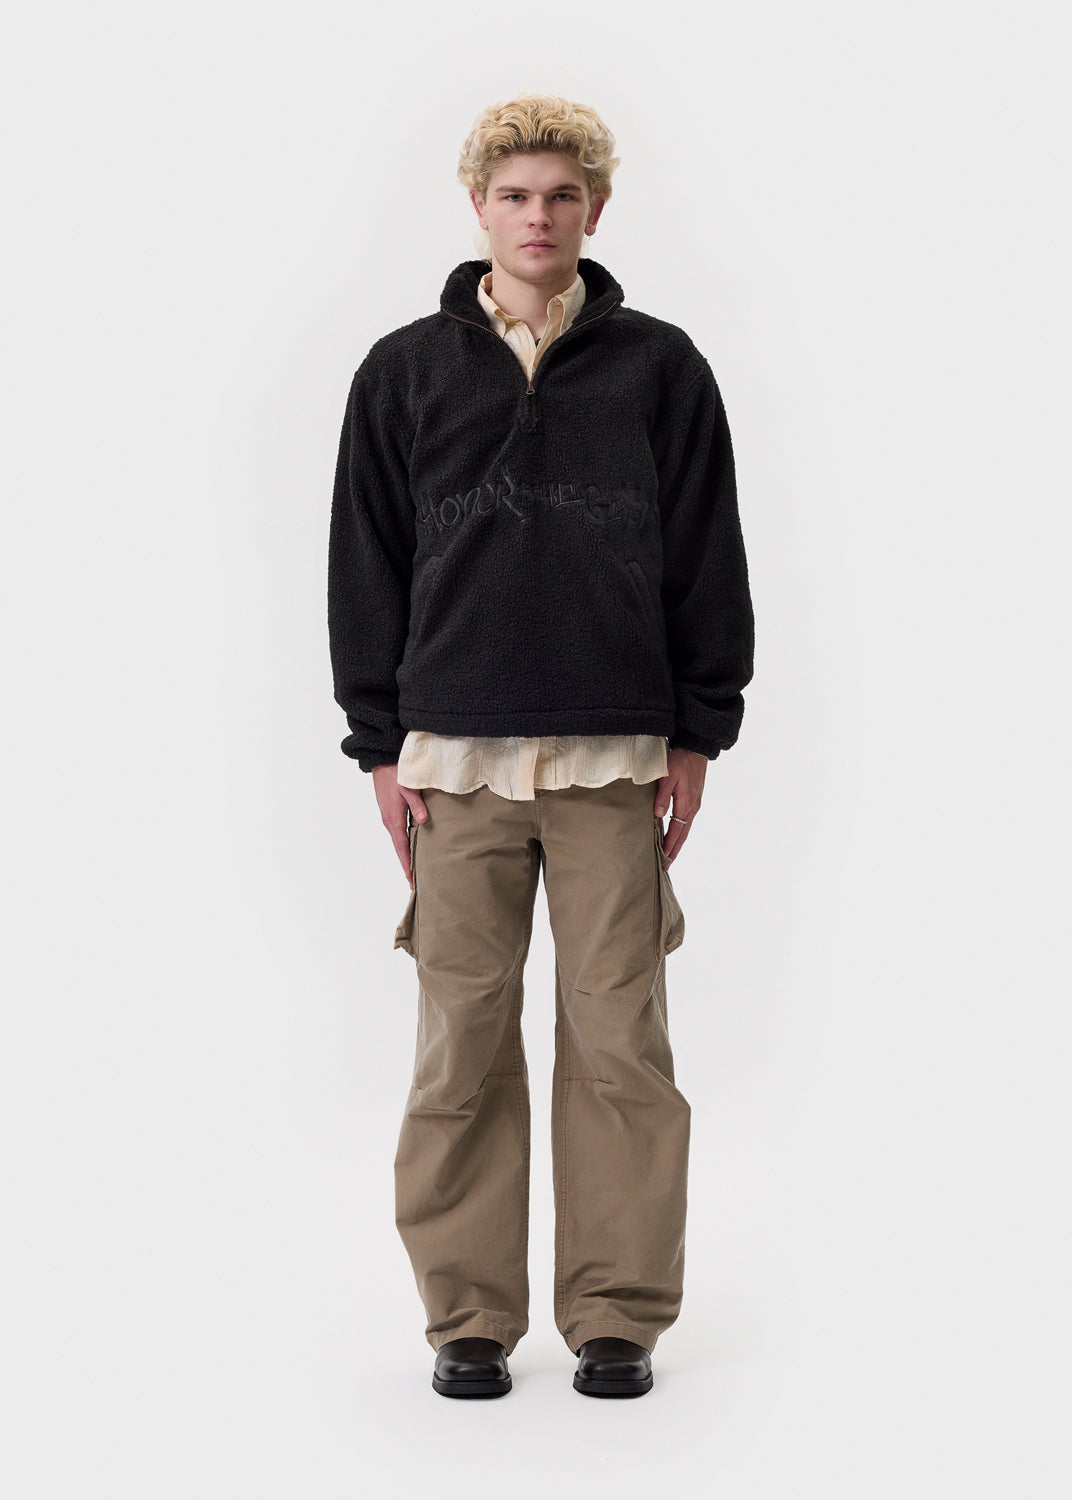 Honor the Gift - Black Script Sherpa Pullover | 1032 SPACE